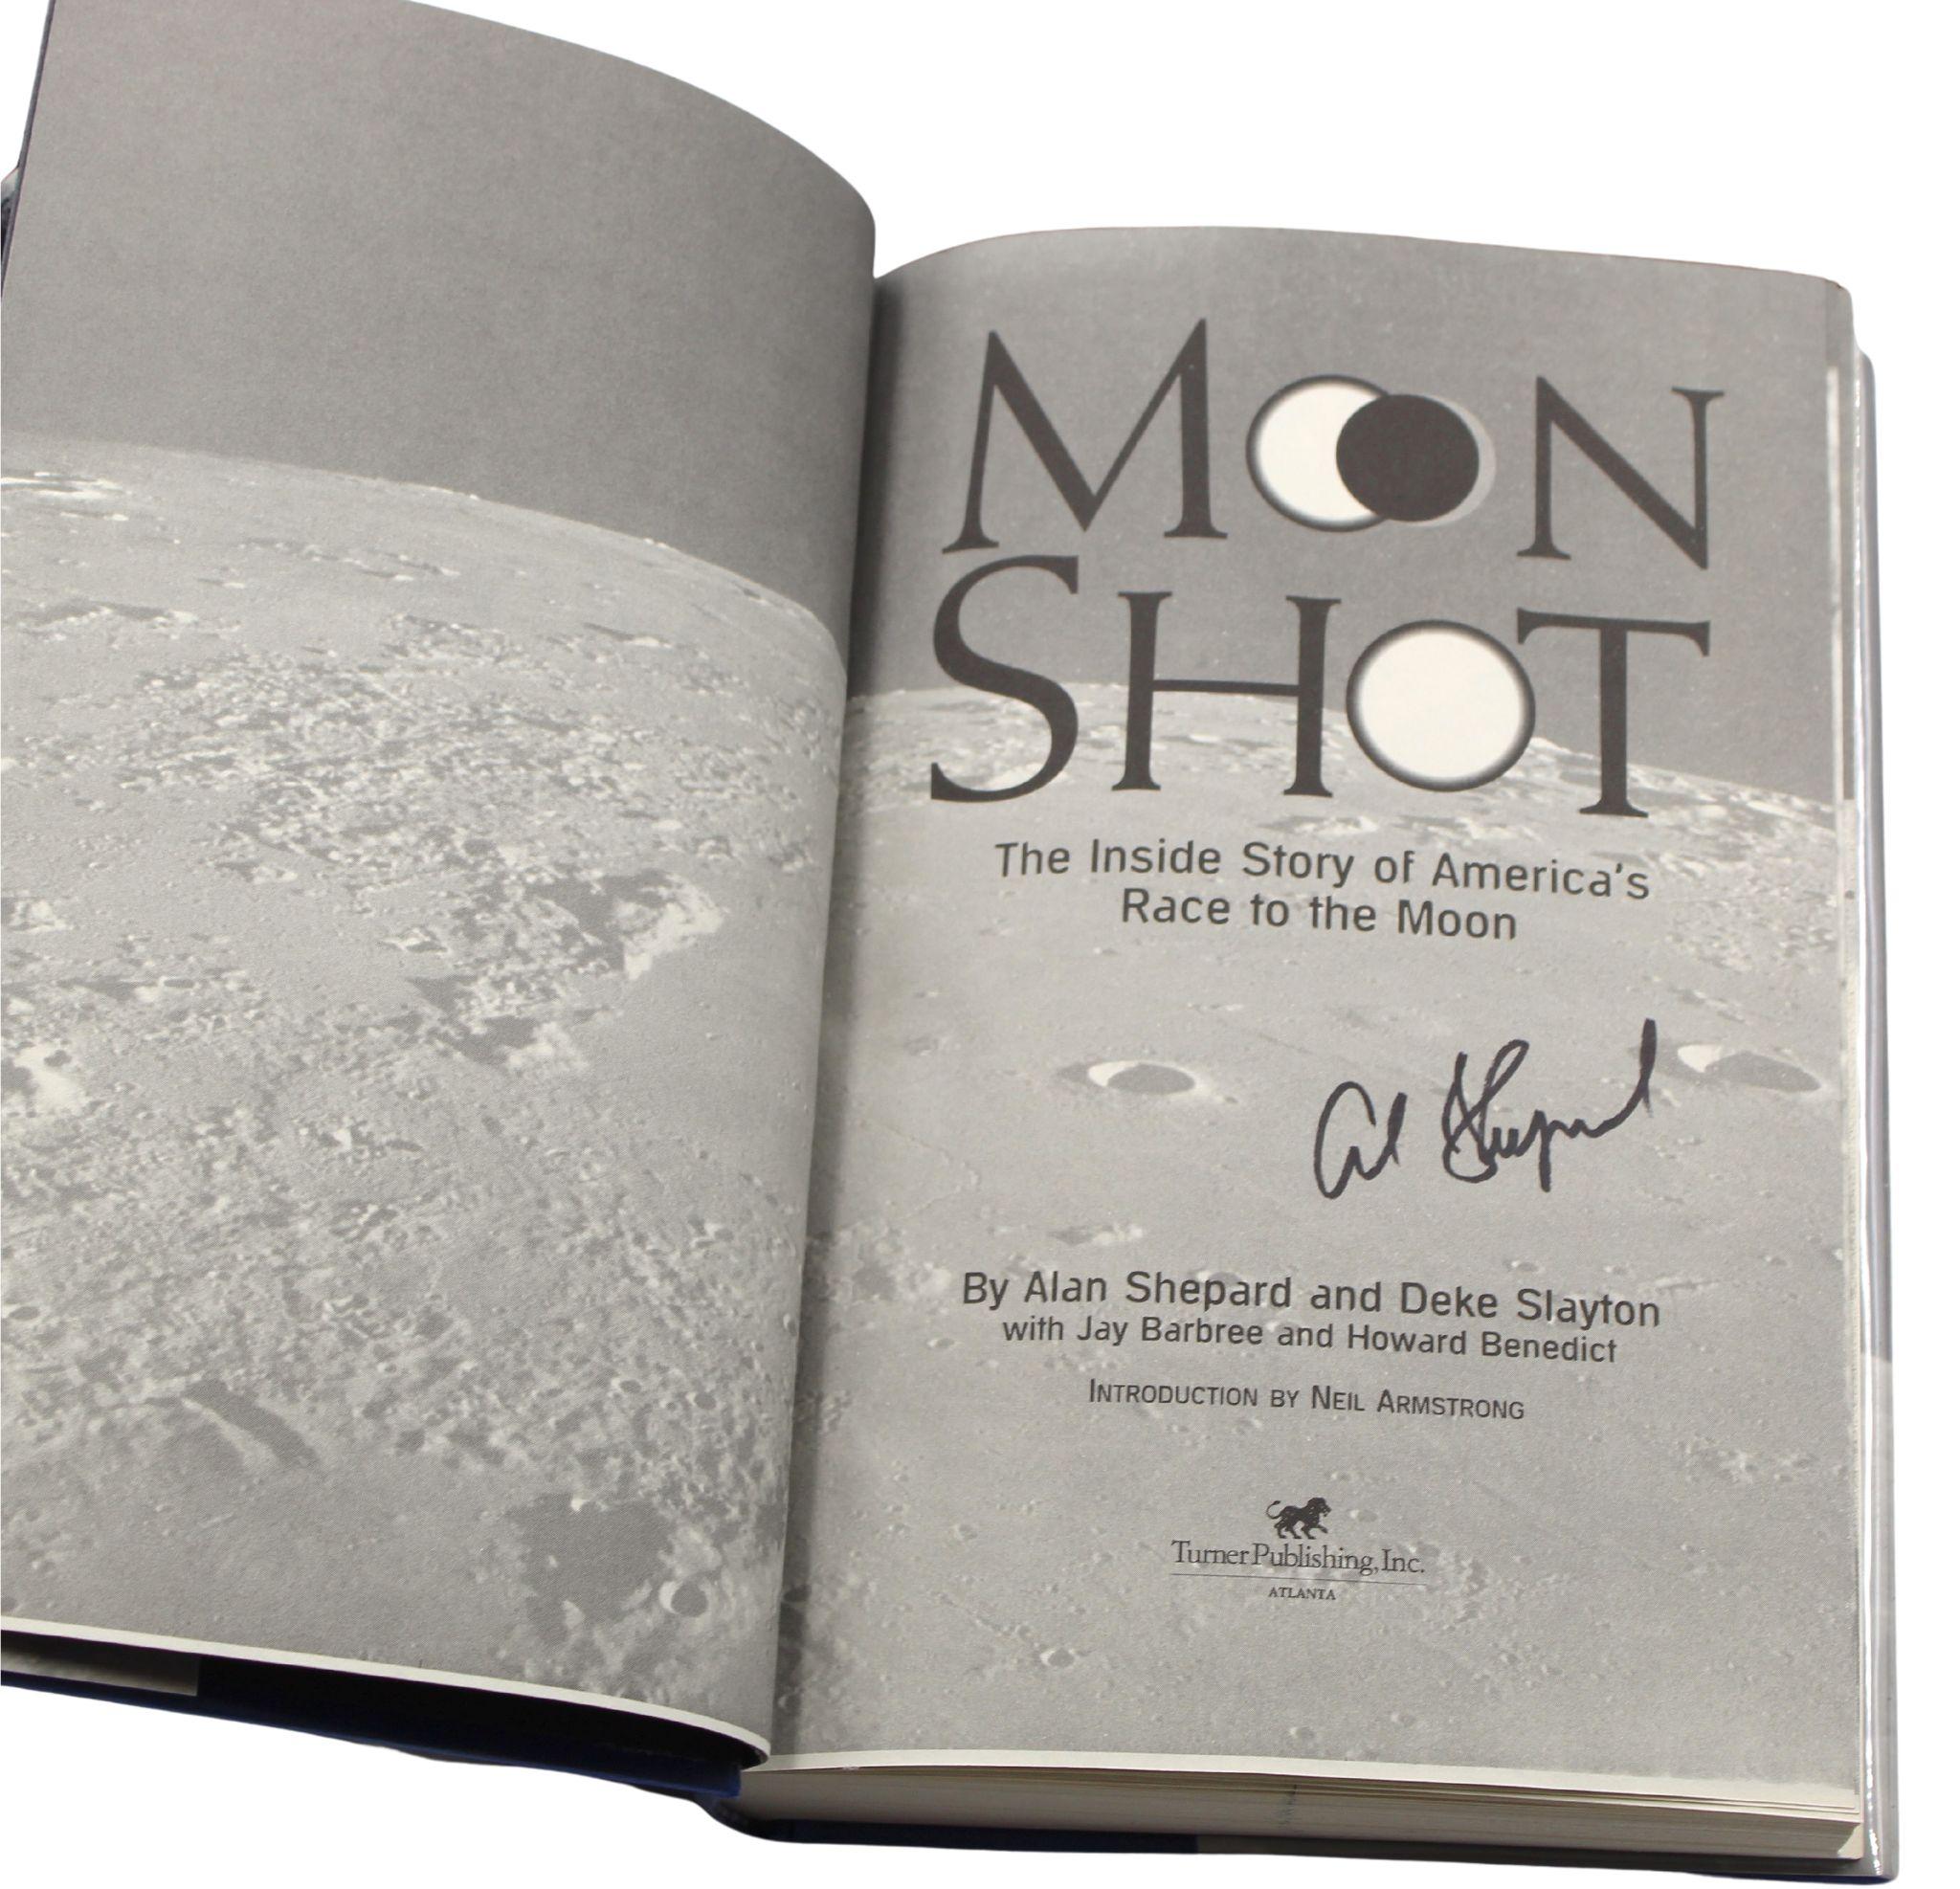 Shepard, Alan, Deke Slayton, Moon Shot: The Inside Story of America's Race to the Moon. Atlanta: Turner Publishing, 1994. First Edition. Signed by Alan Shepard on the full title page. Introduction by Neil Armstrong. Original dust jacket and blue